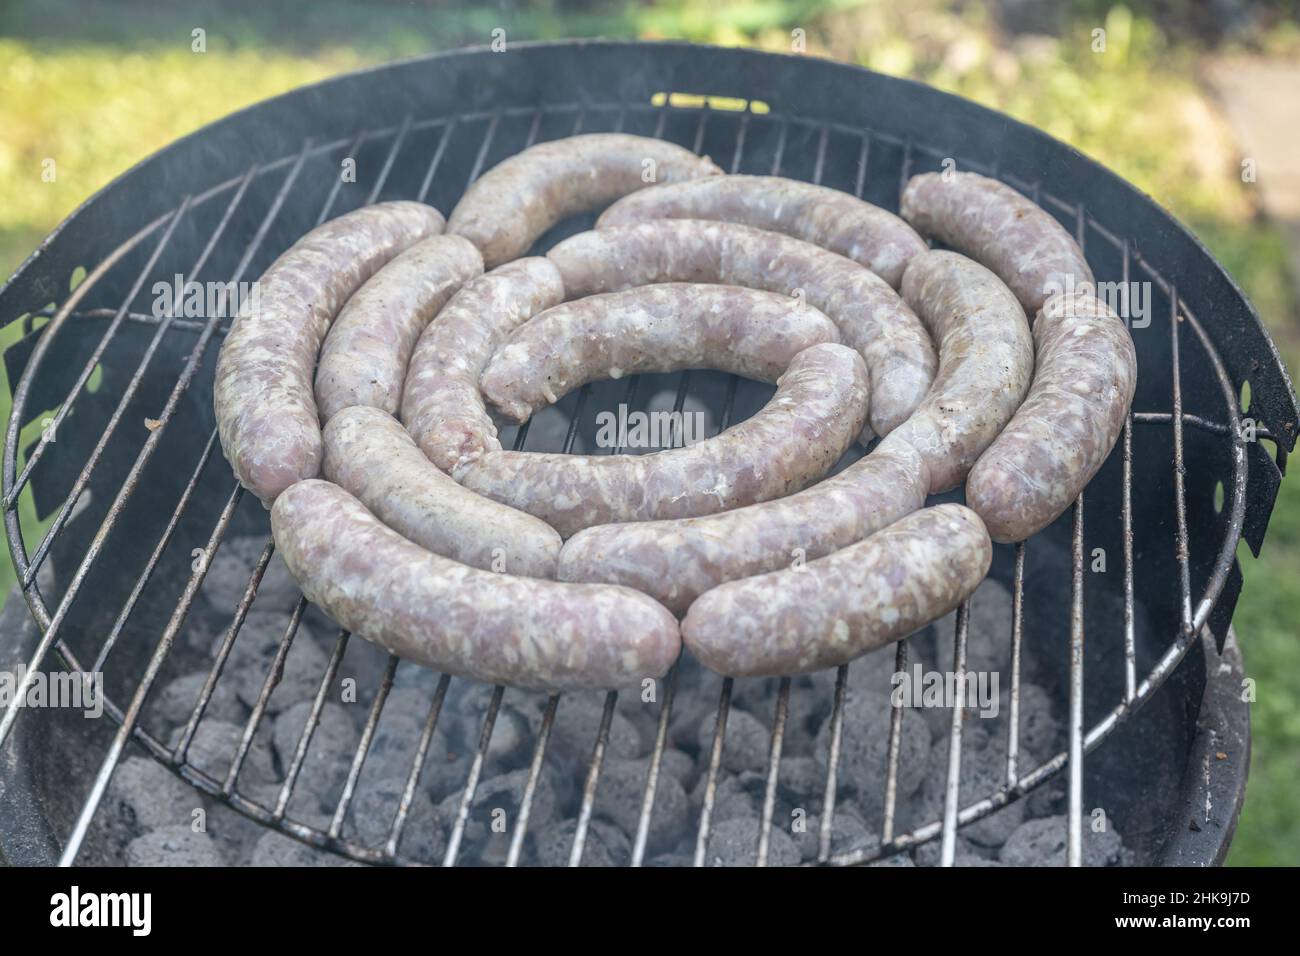 Barbecue grill bbq on coal charcoal grill with raw bratwurst sausages meat delicious summer meal. Stock Photo